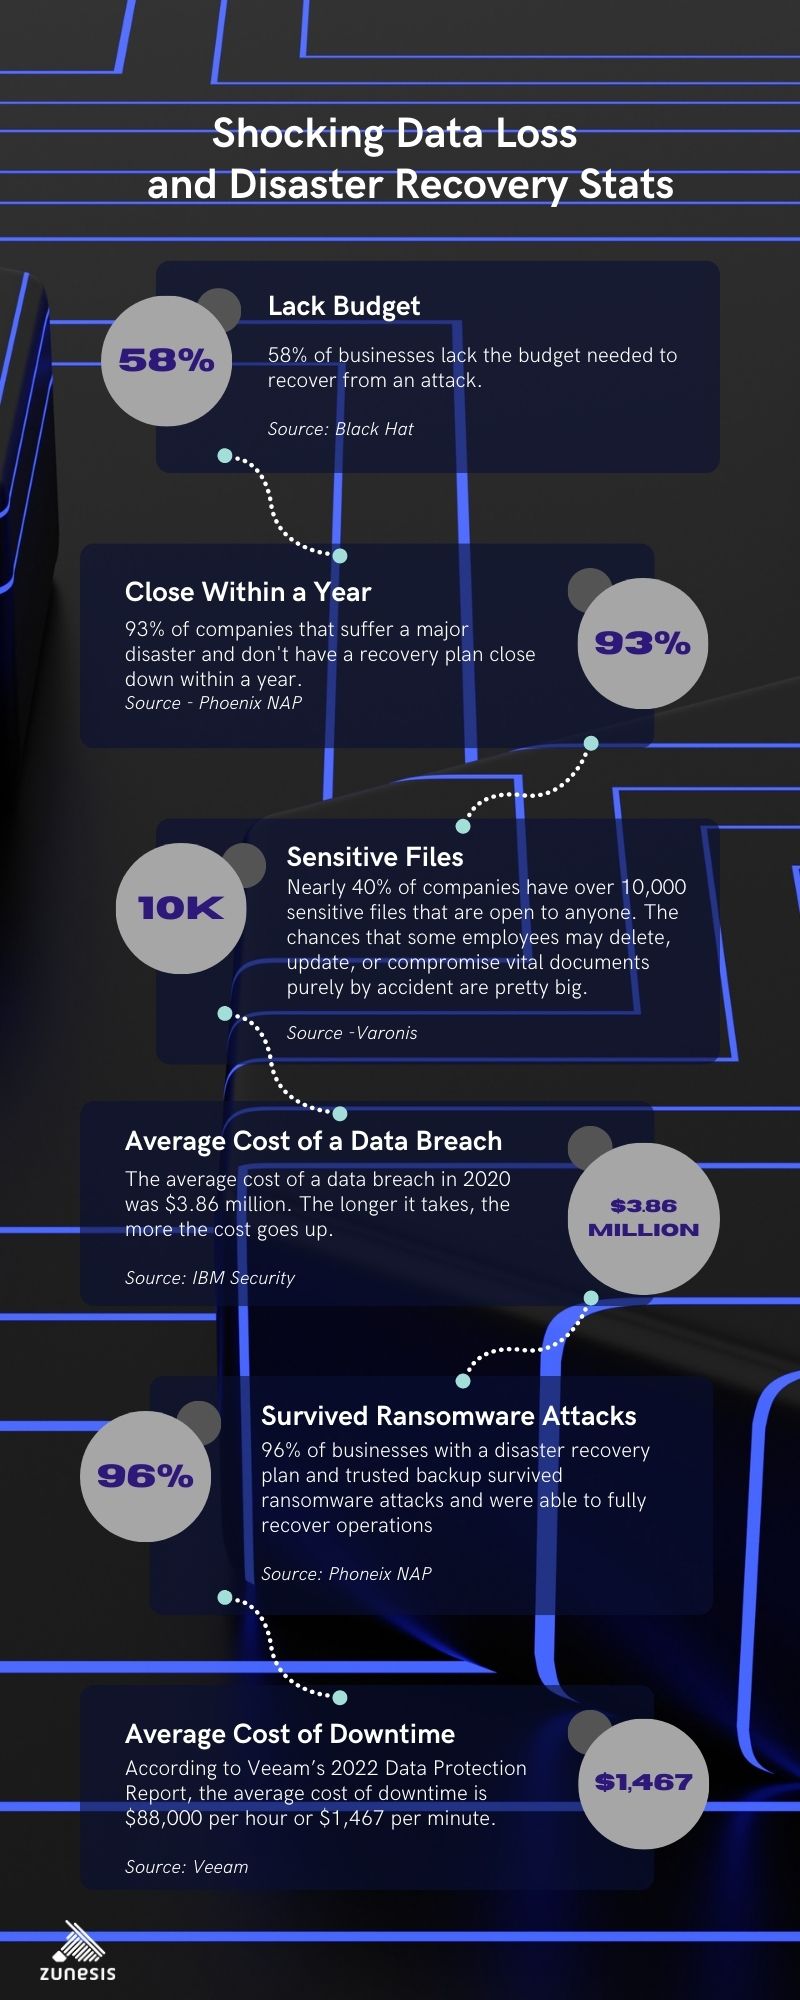 Shocking Data Loss and Disaster Recovery Stats